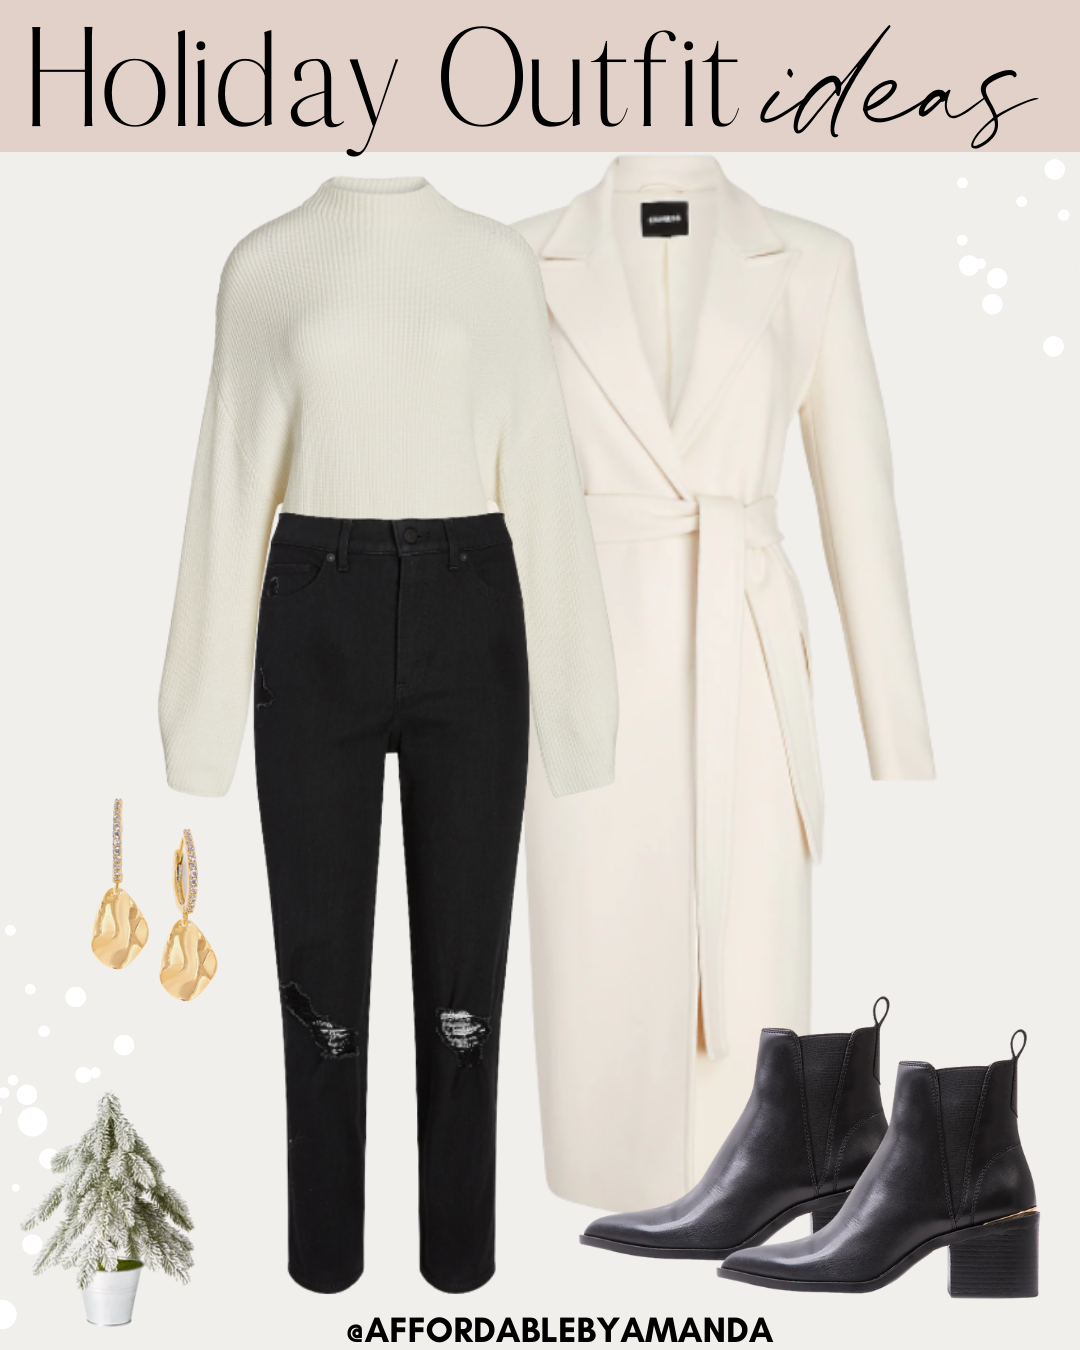 Holiday Outfit Ideas 2020 - Affordable by Amanda